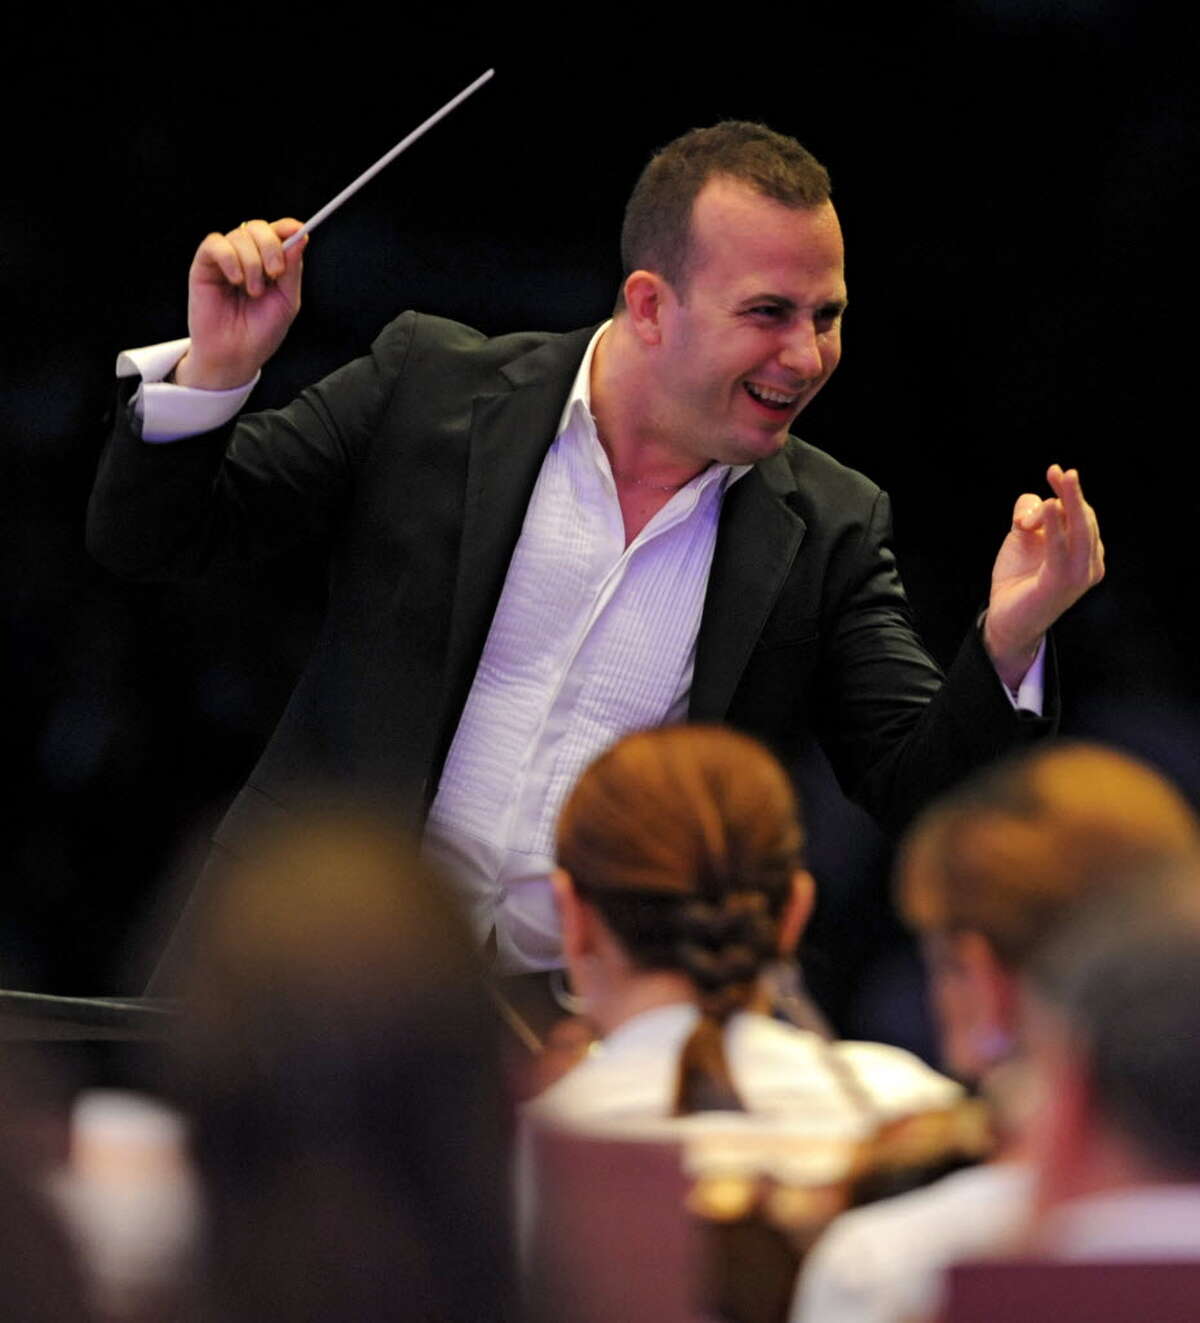 Music director Yannick Nezet-Seguin conducts the Philadelphia Orchestra at Saratoga Performing Arts Center Wednesday, Aug. 8, 2012 in Saratoga Springs, N.Y. This is Yannick Nezet-Seguin's first performance at SPAC. (Lori Van Buren / Times Union)